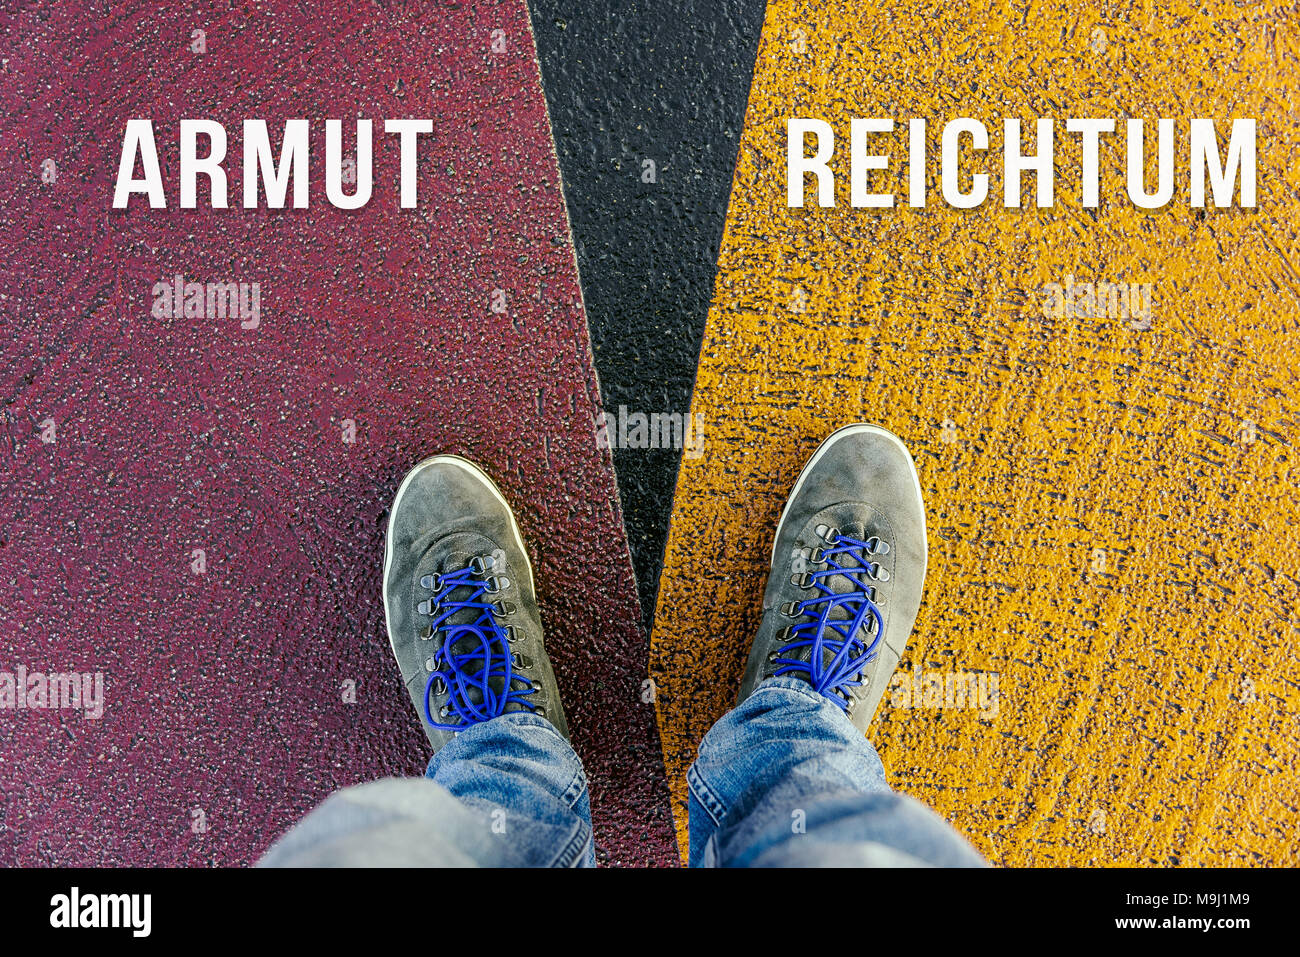 Reaching a crossroads having to choose between armut and reichtum in german meaning poverty and wealth symbolized by two feet standing on two differen Stock Photo